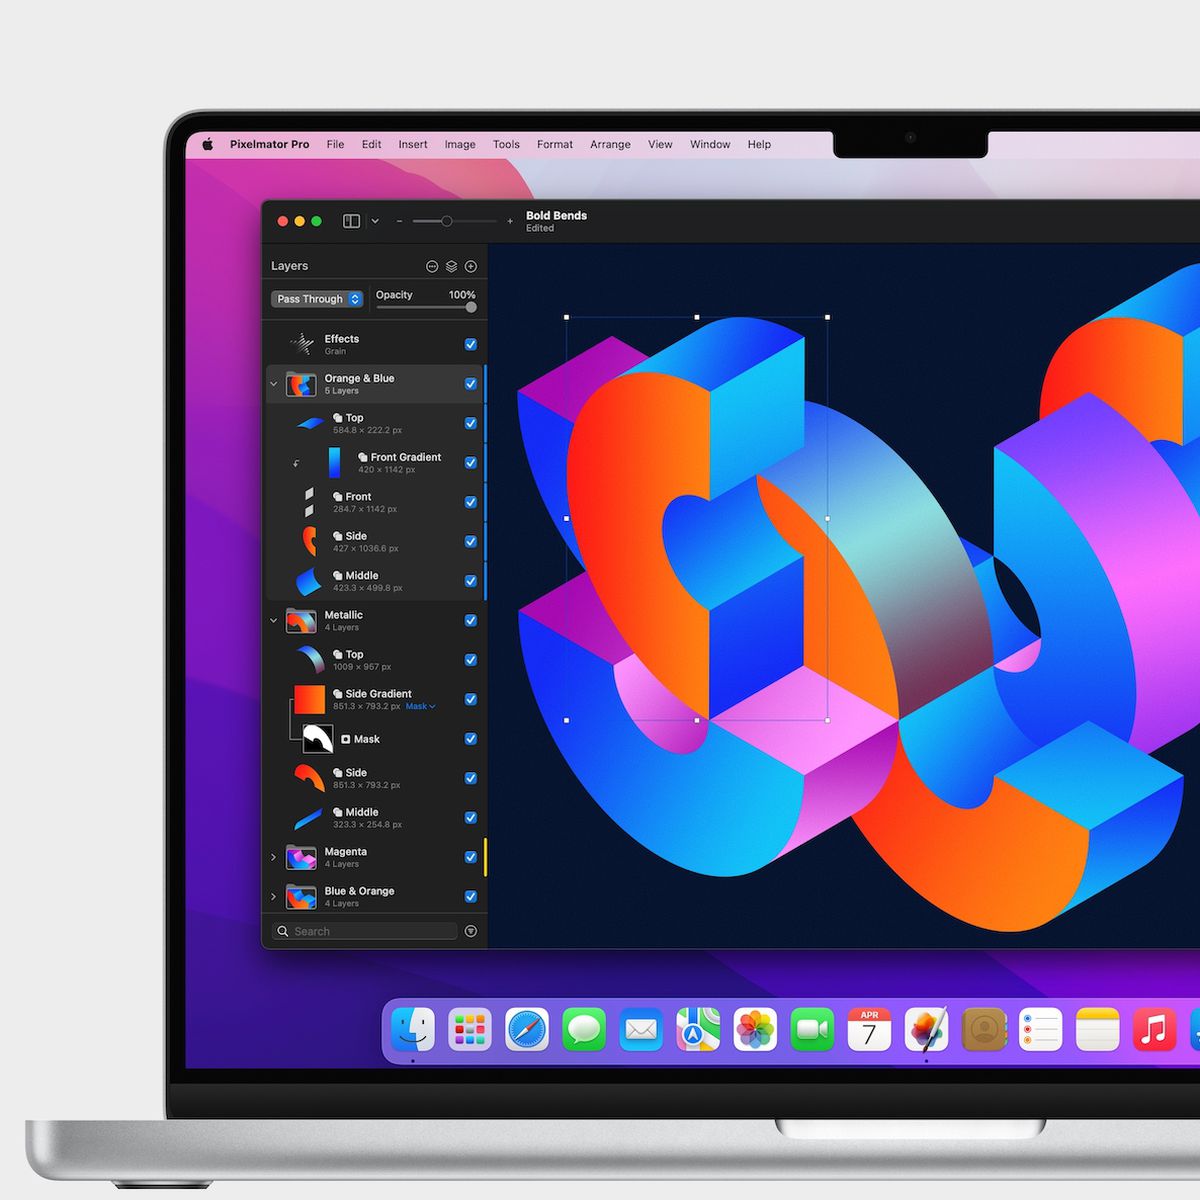 Pixelmator Pro 2.4 Adds New Layer Vector Shapes, M1 Ultra Support, -